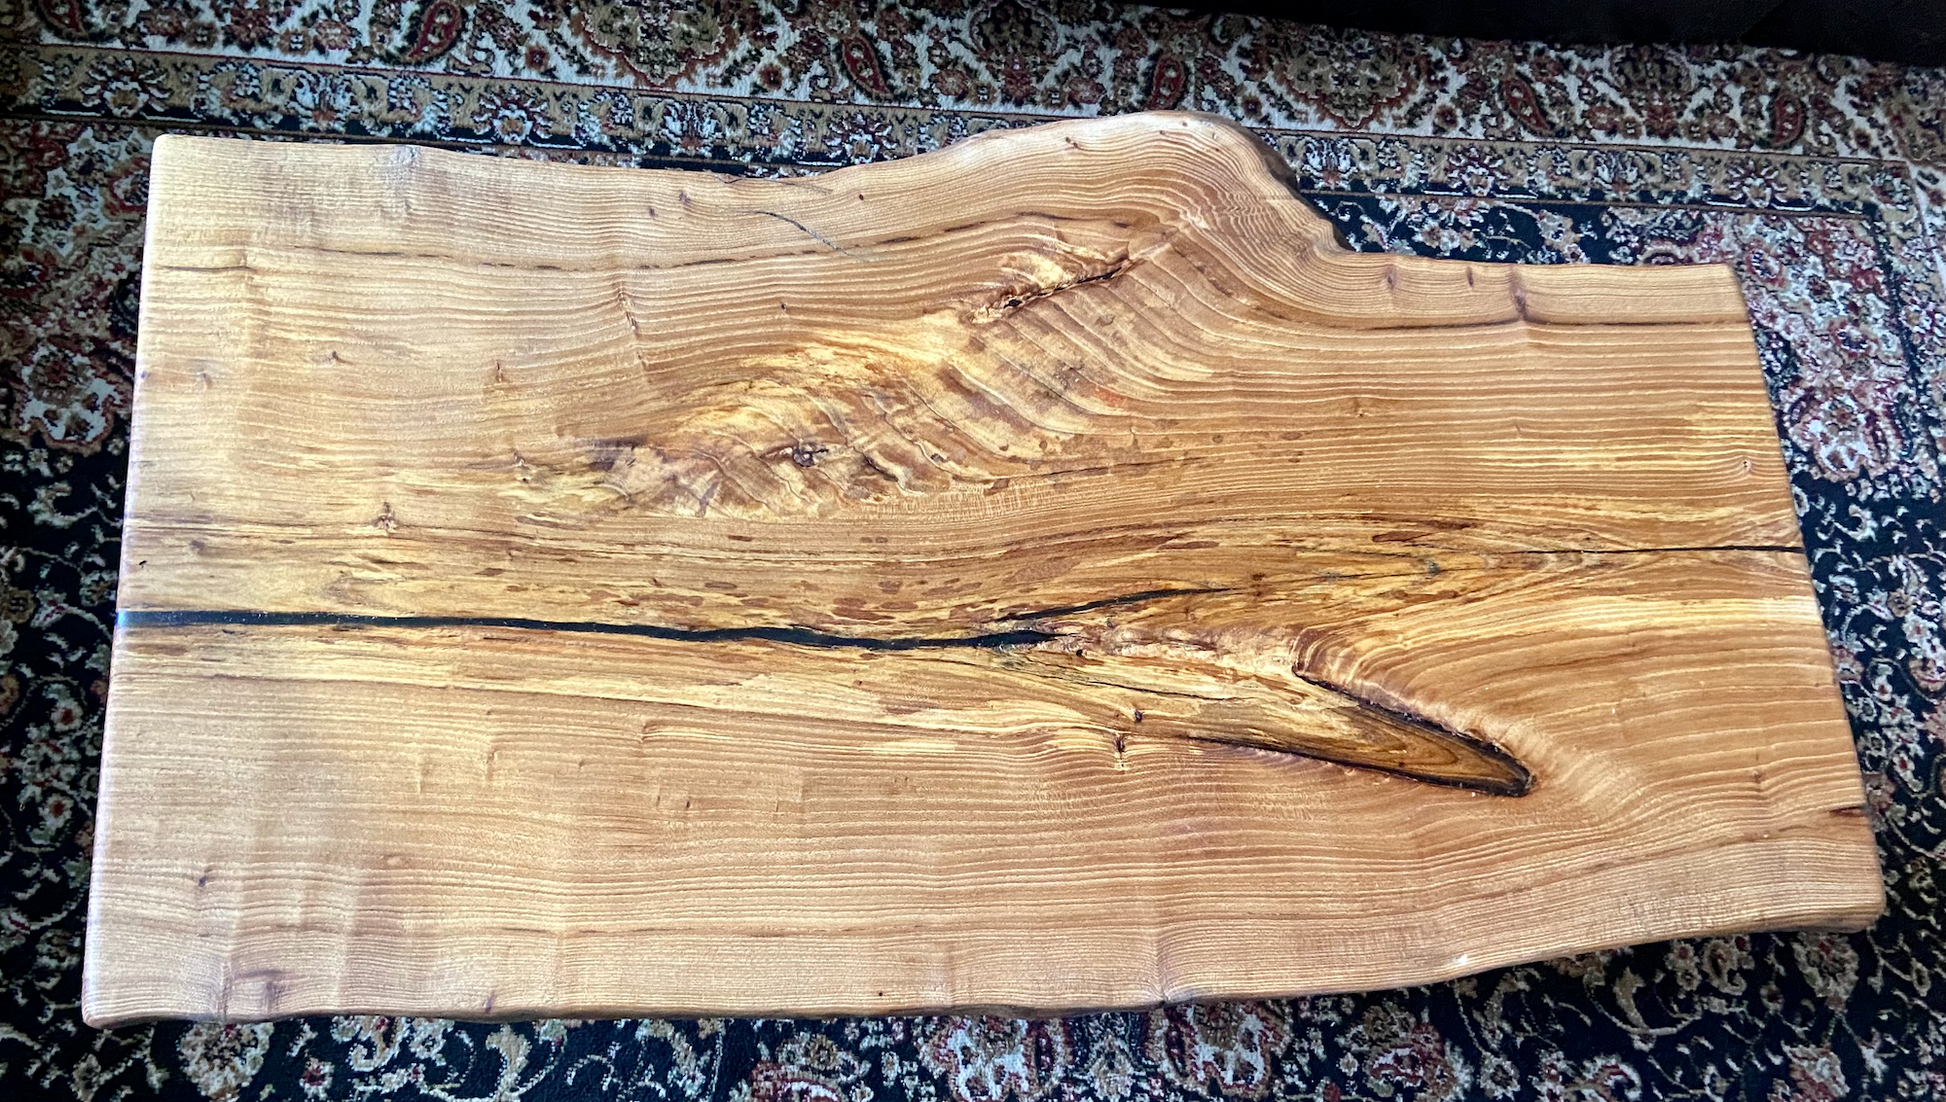 Unique Live Edge English Chestnut Coffee Table with Beautiful Grain Patterns